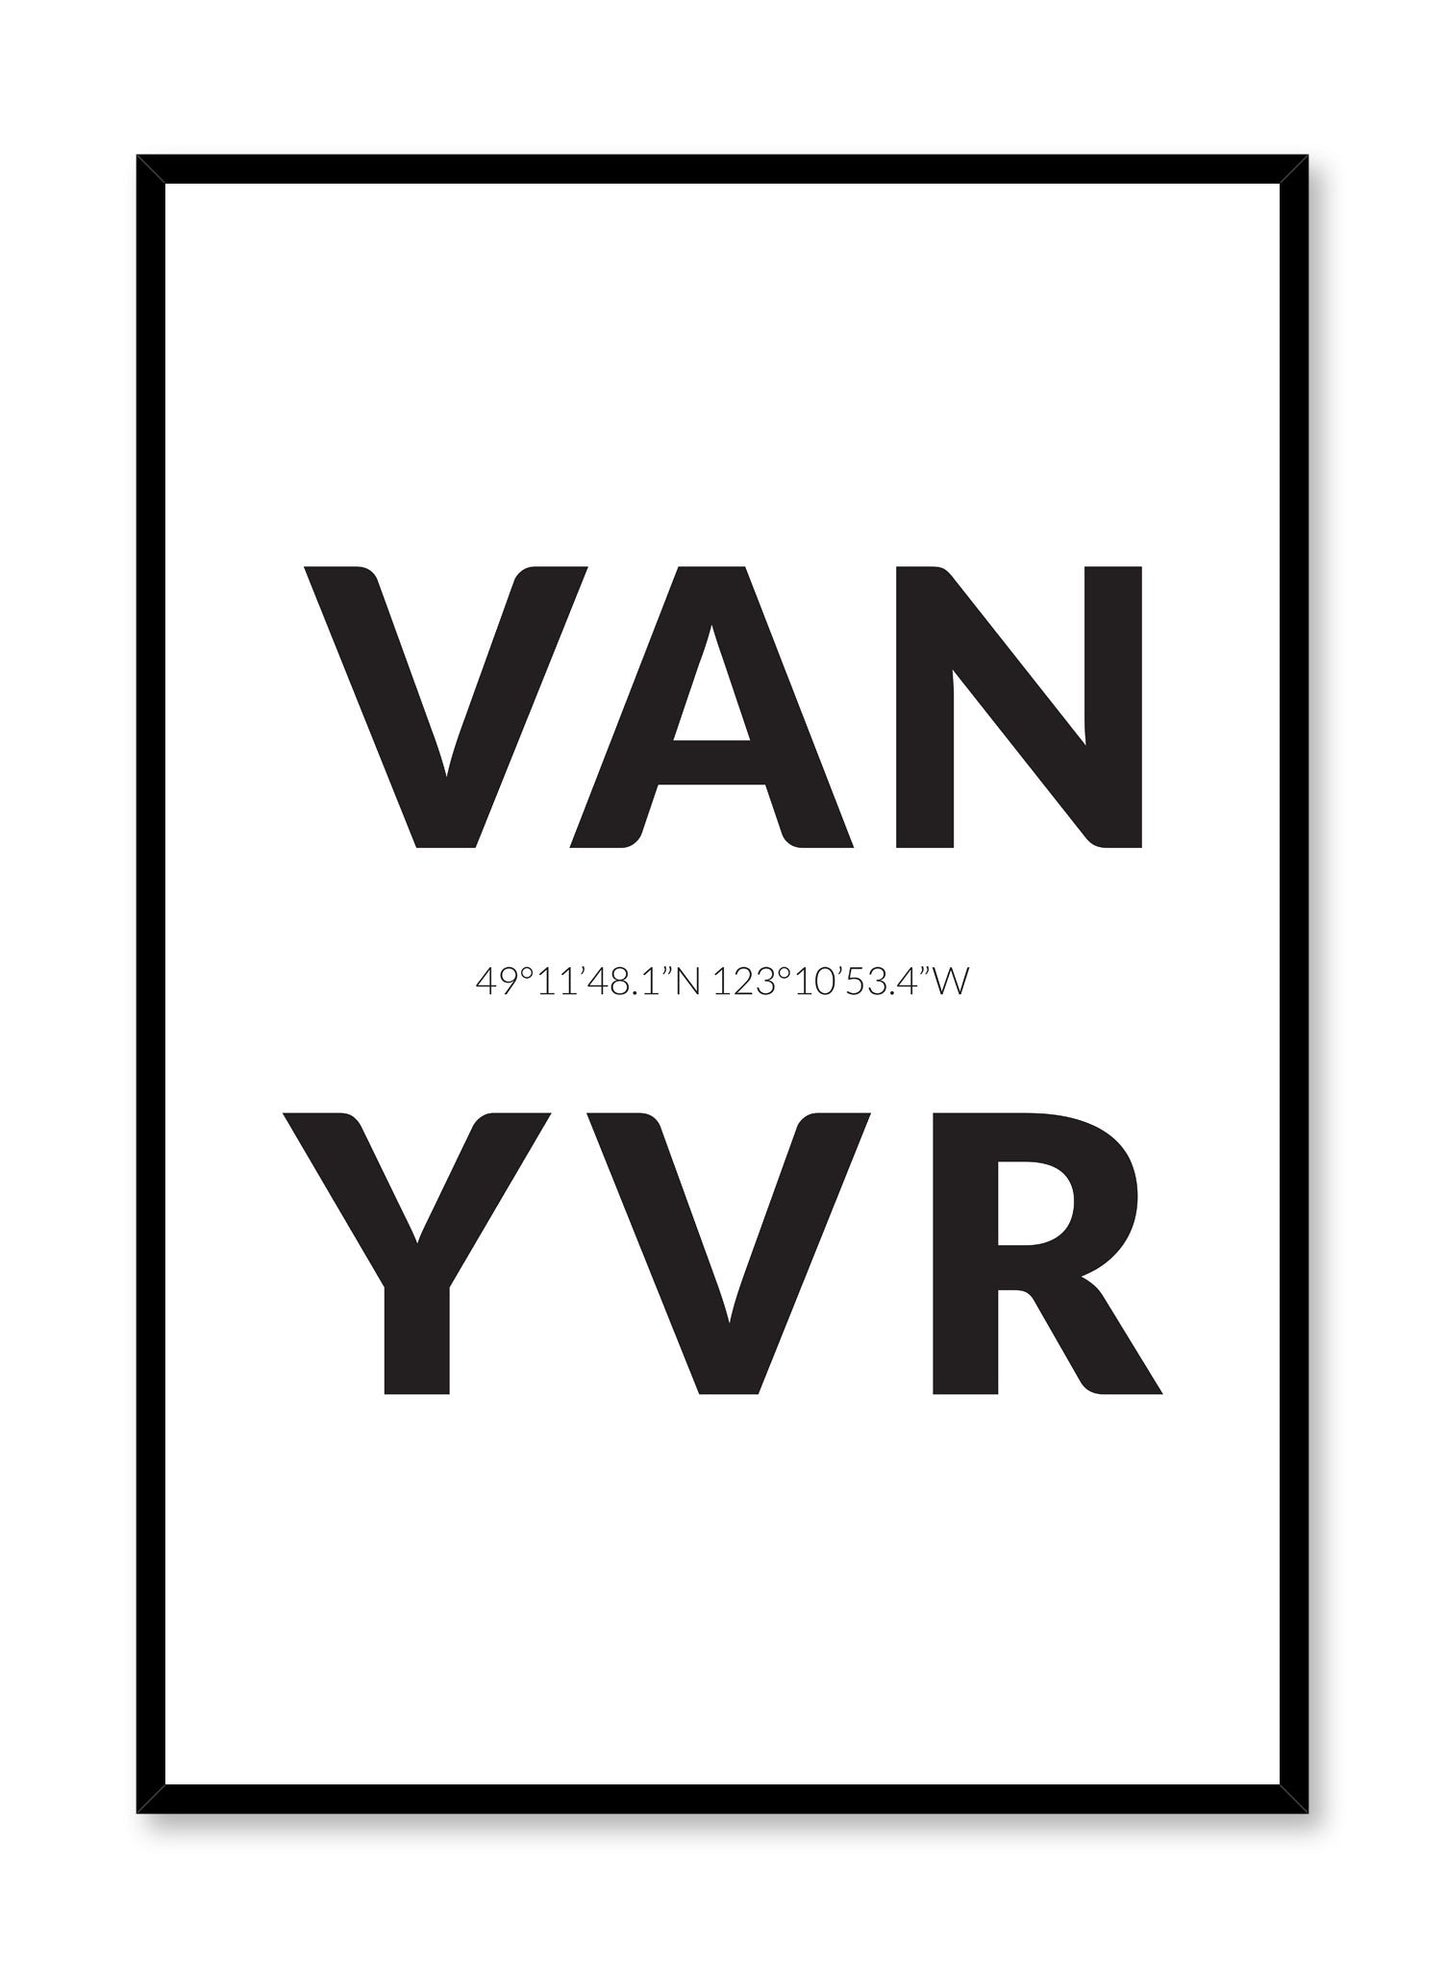 Minimalist design poster by Opposite Wall with airport code Vancouver YVR